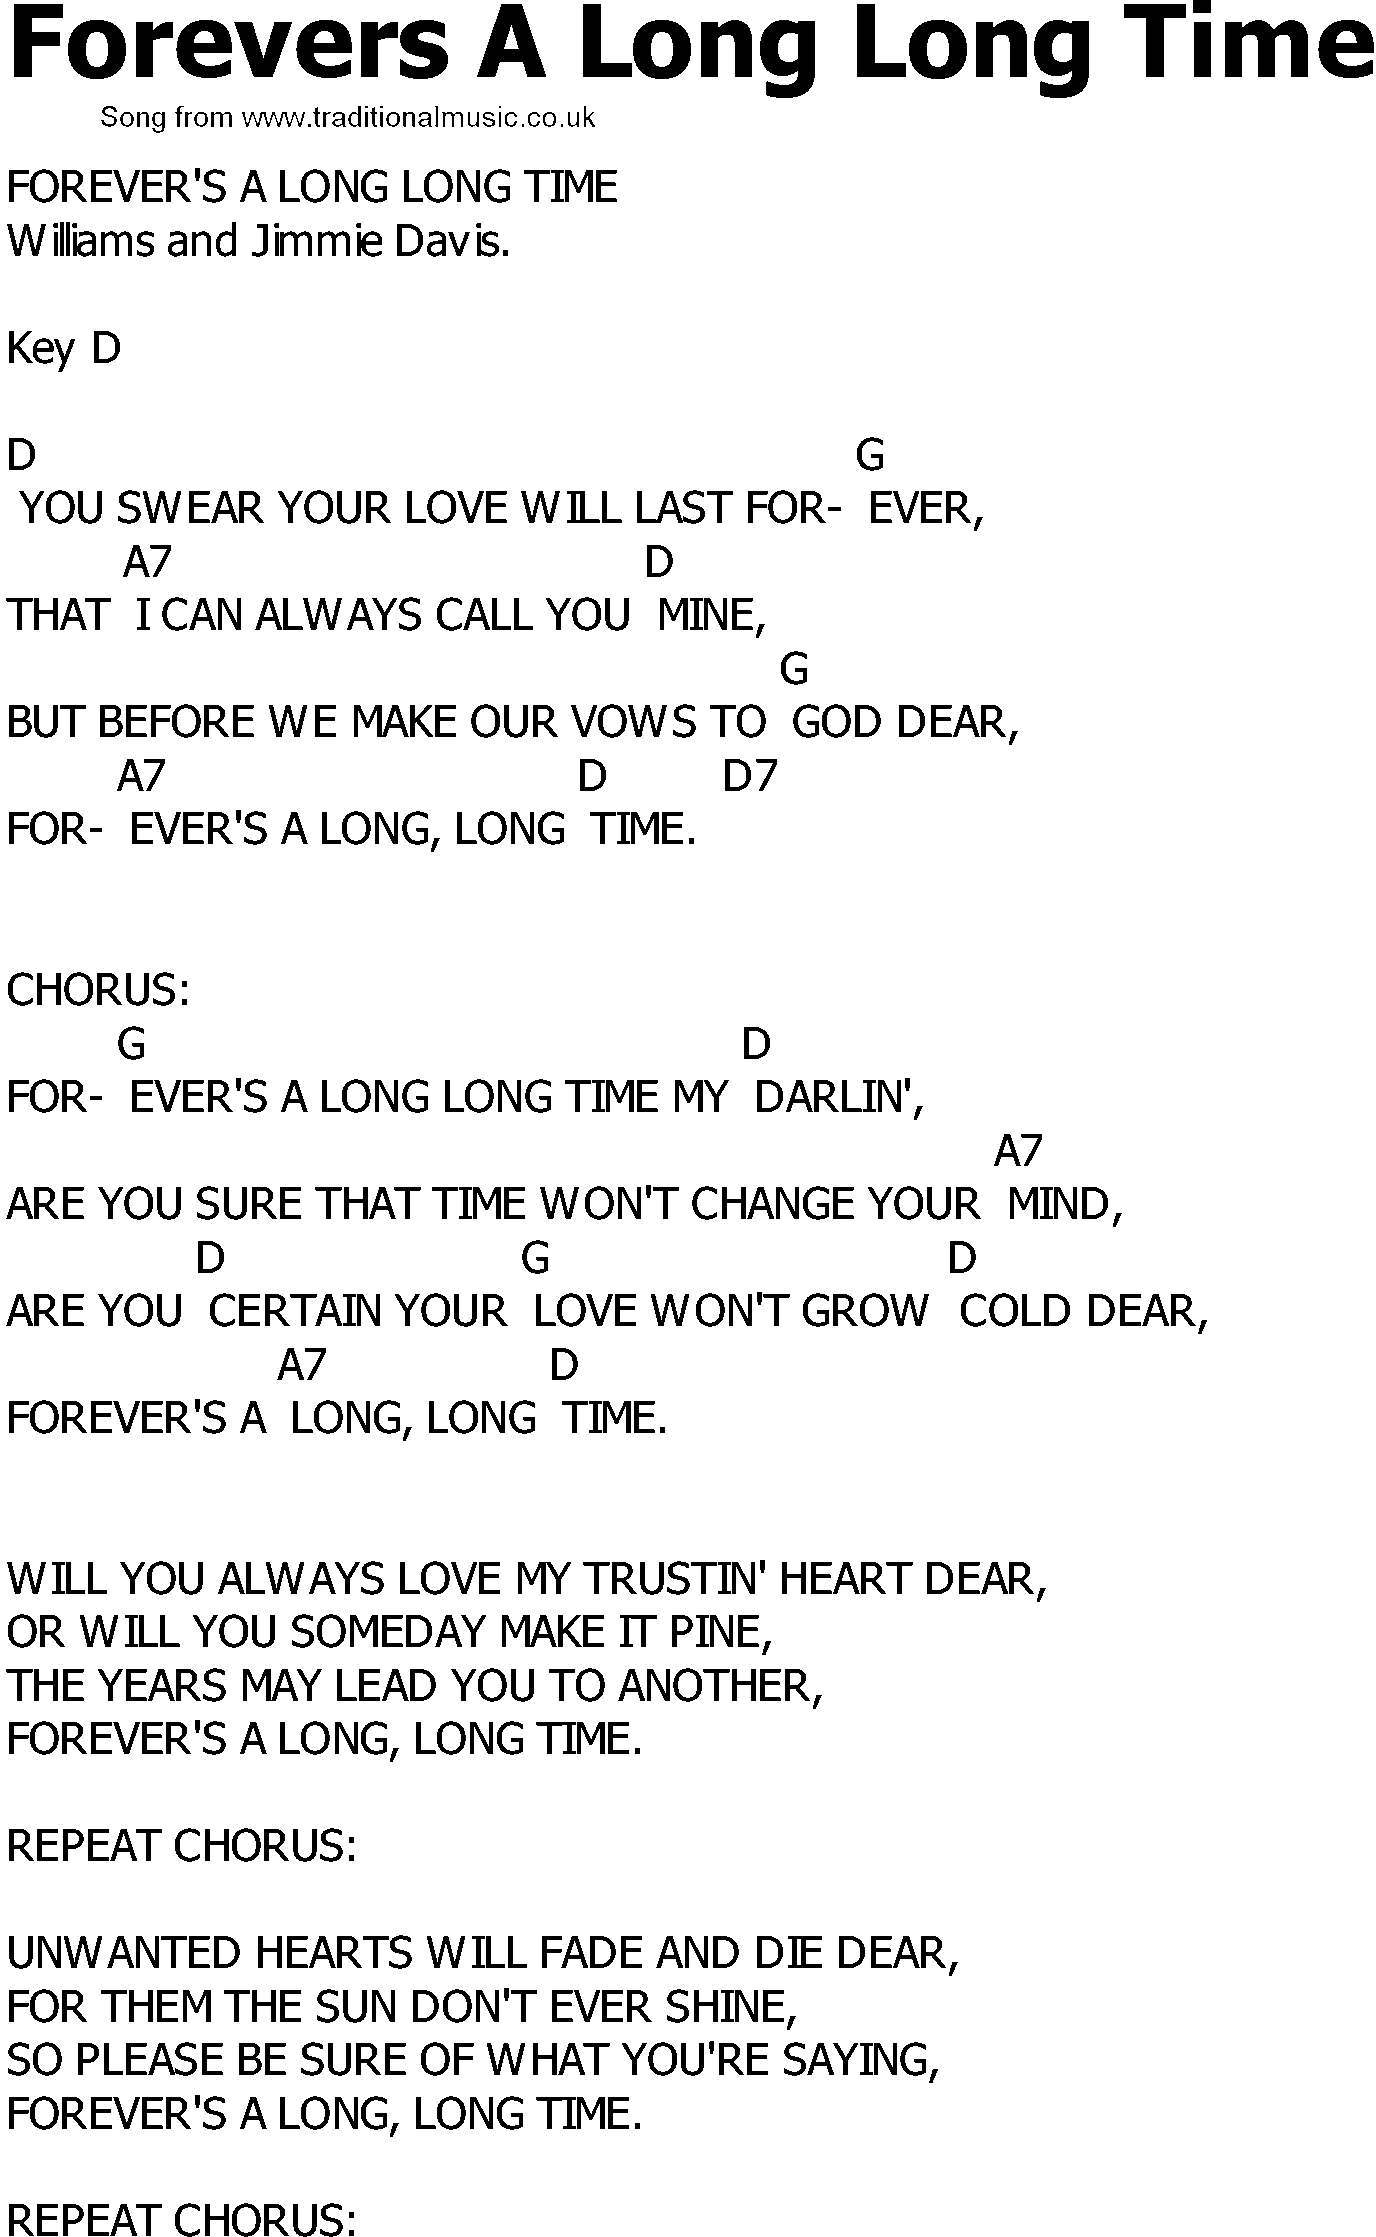 Old Country song lyrics with chords - Forevers A Long Long Time